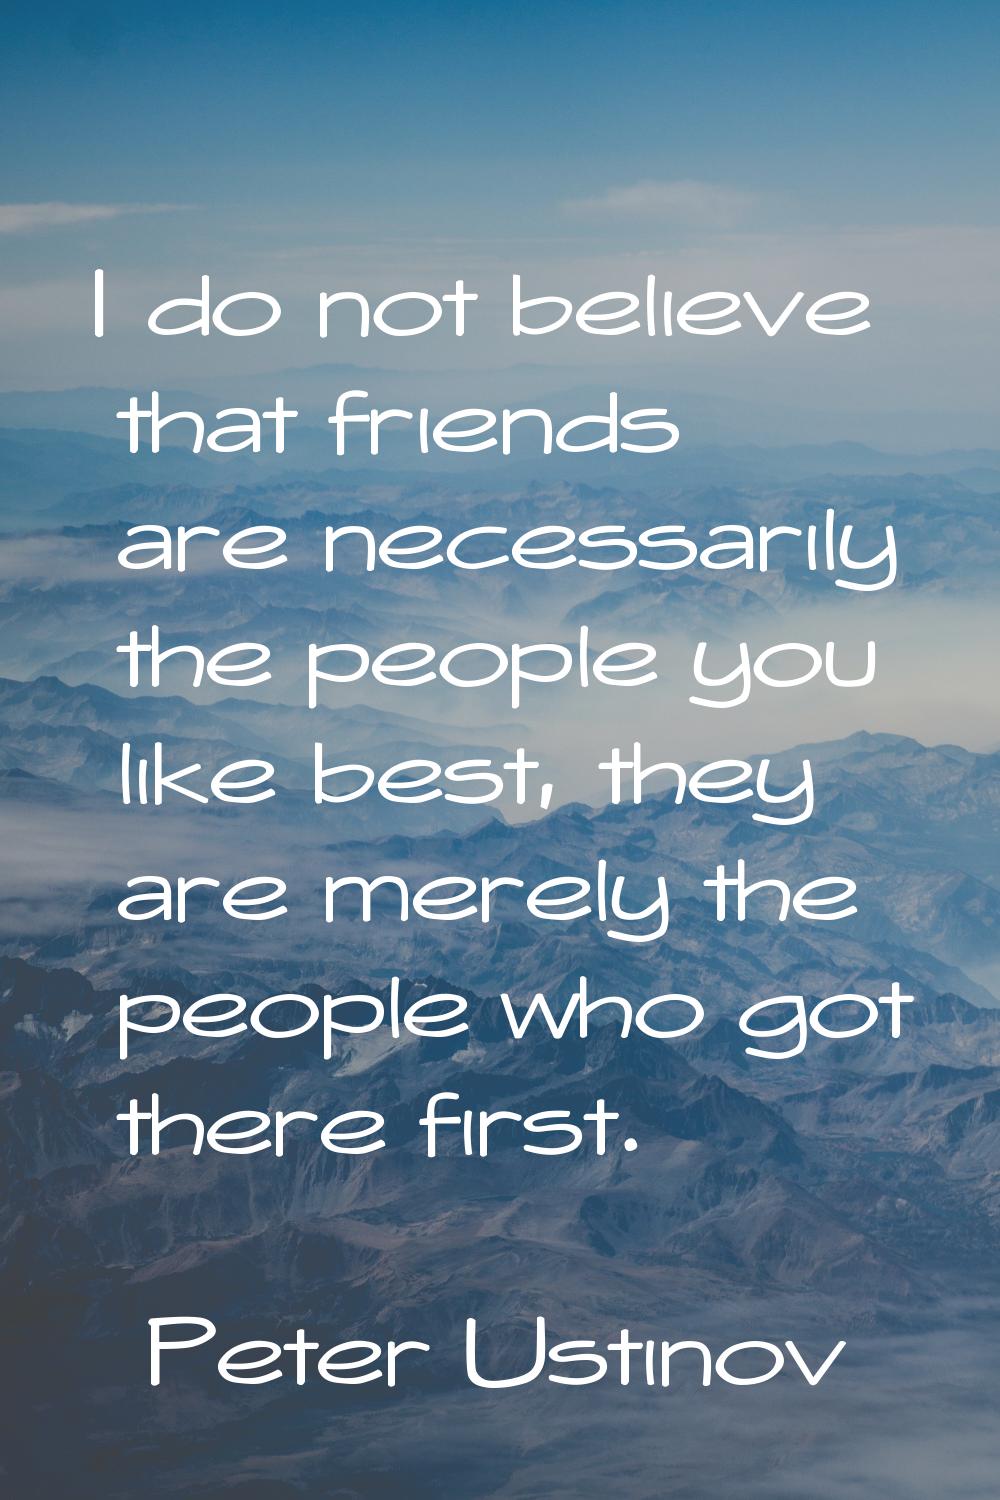 I do not believe that friends are necessarily the people you like best, they are merely the people 